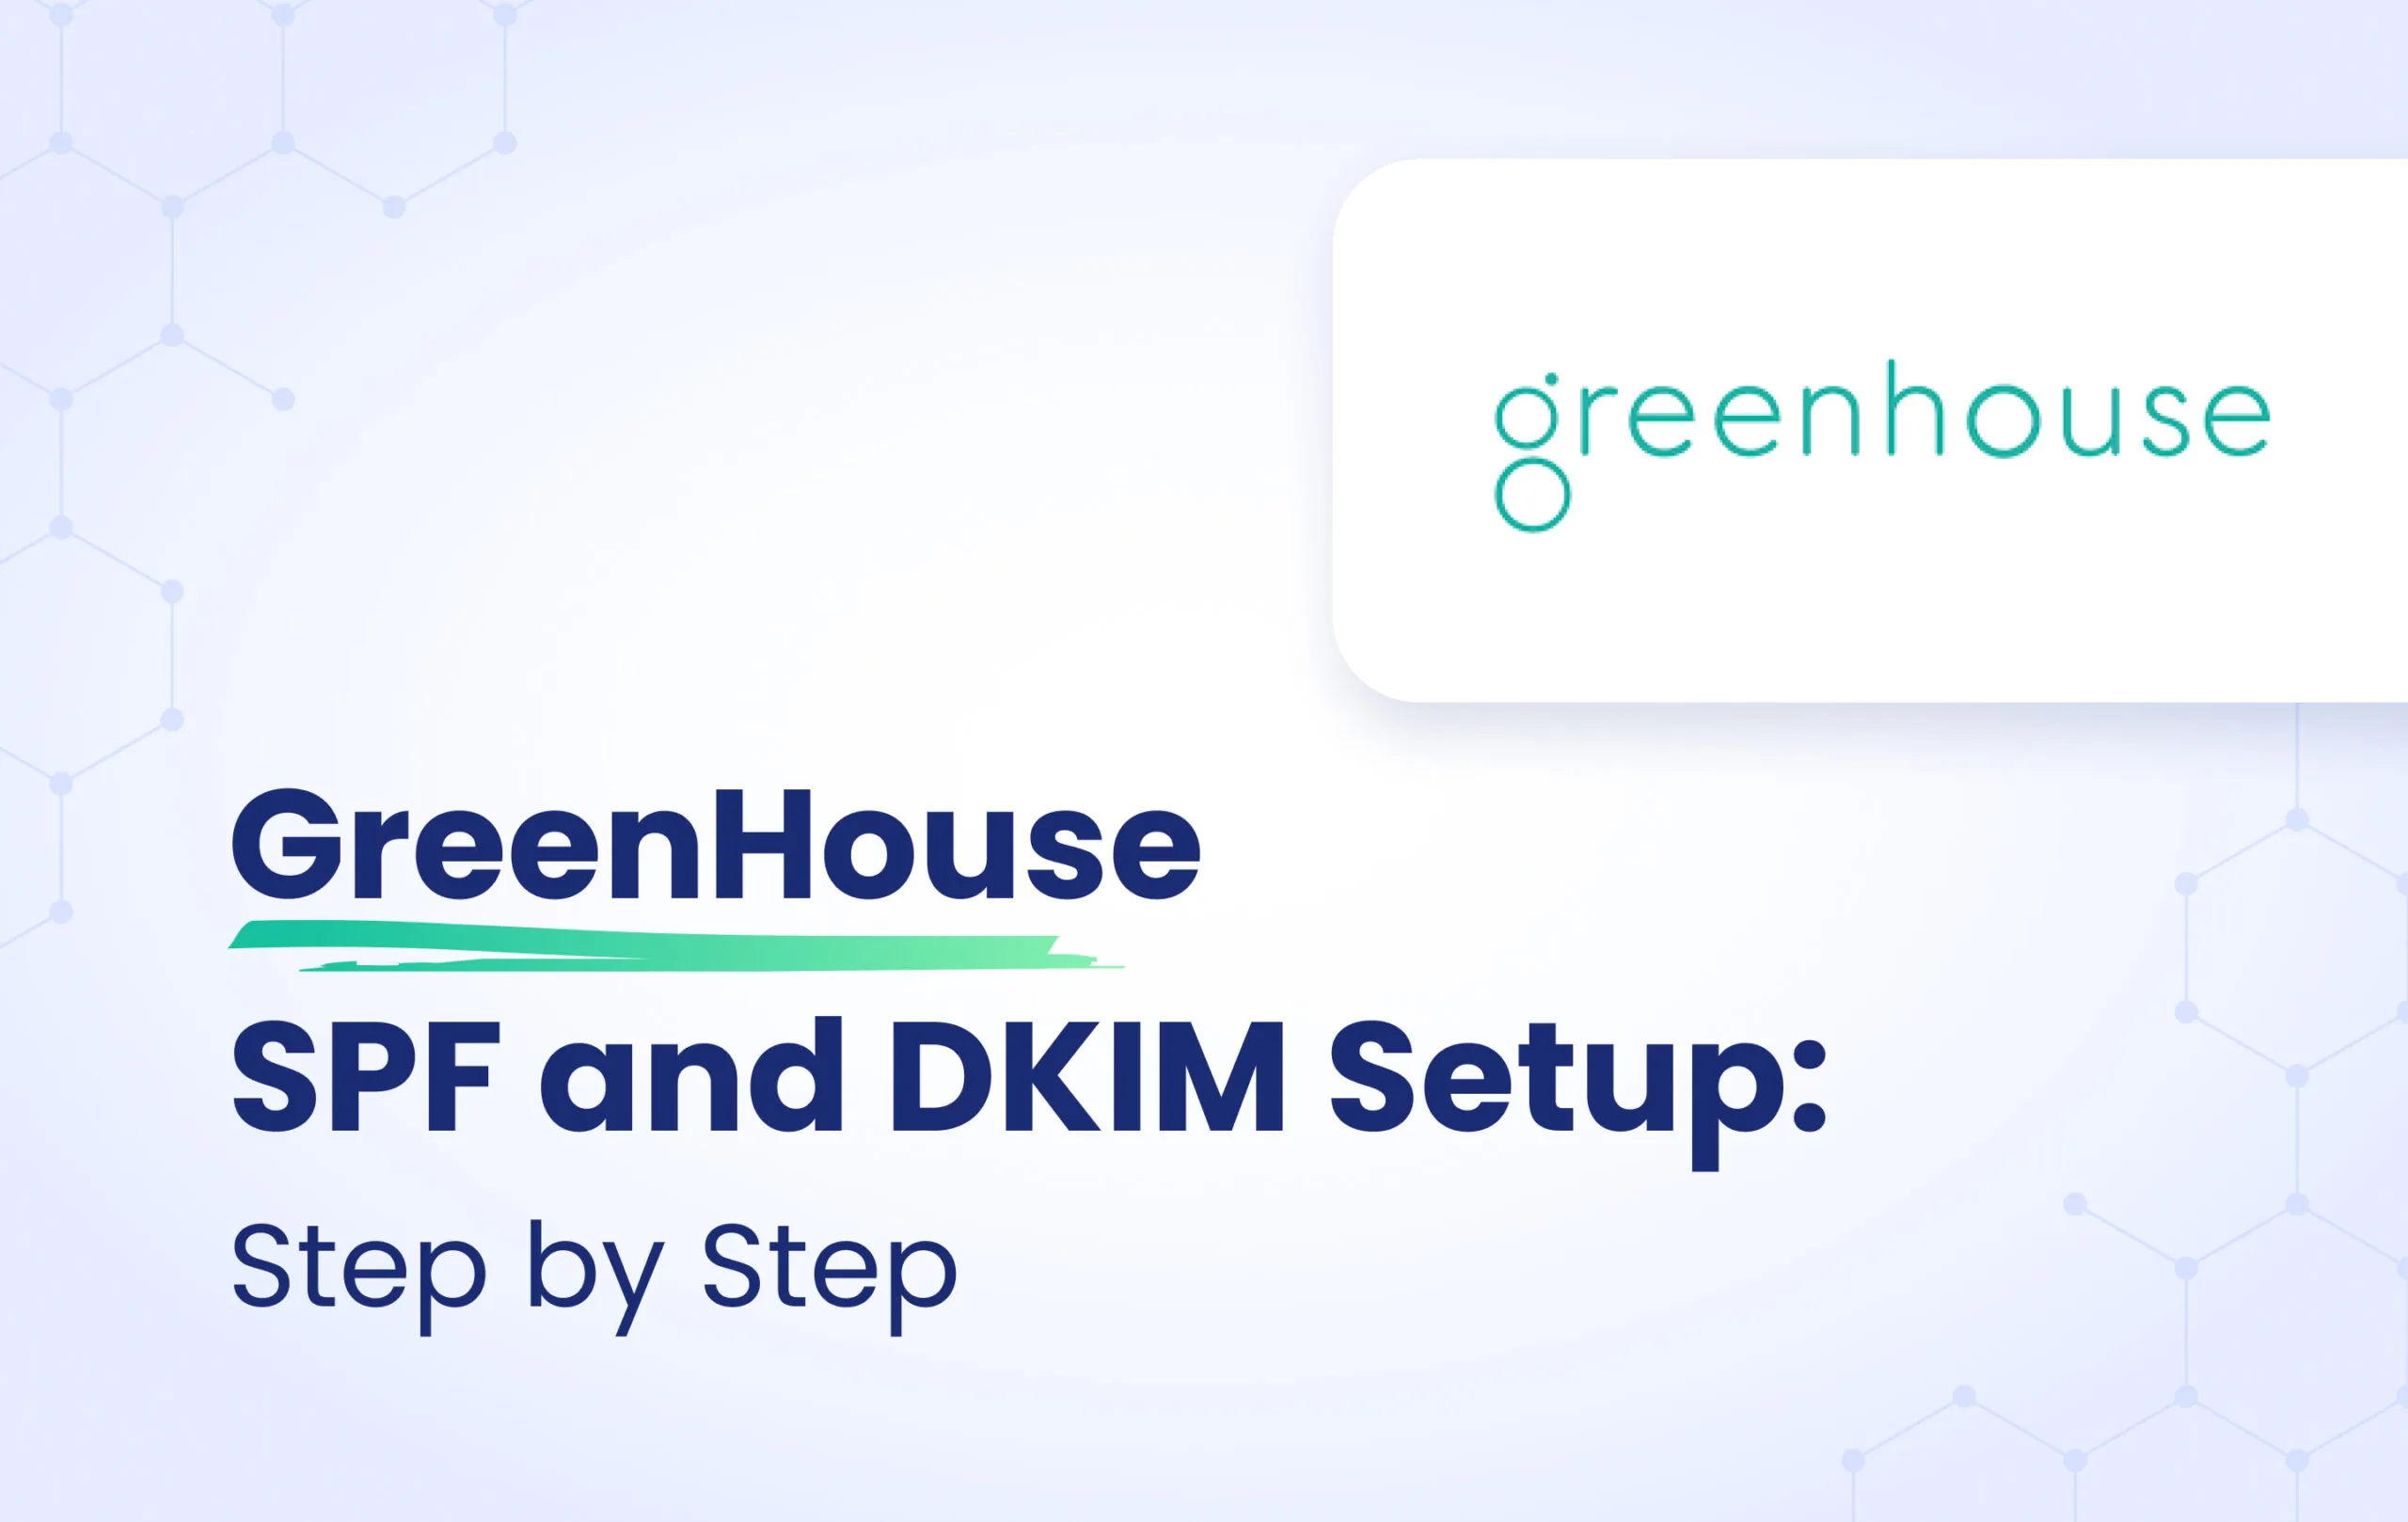 GreenHouse SPF and DKIM Setup: Step-by-Step featured image